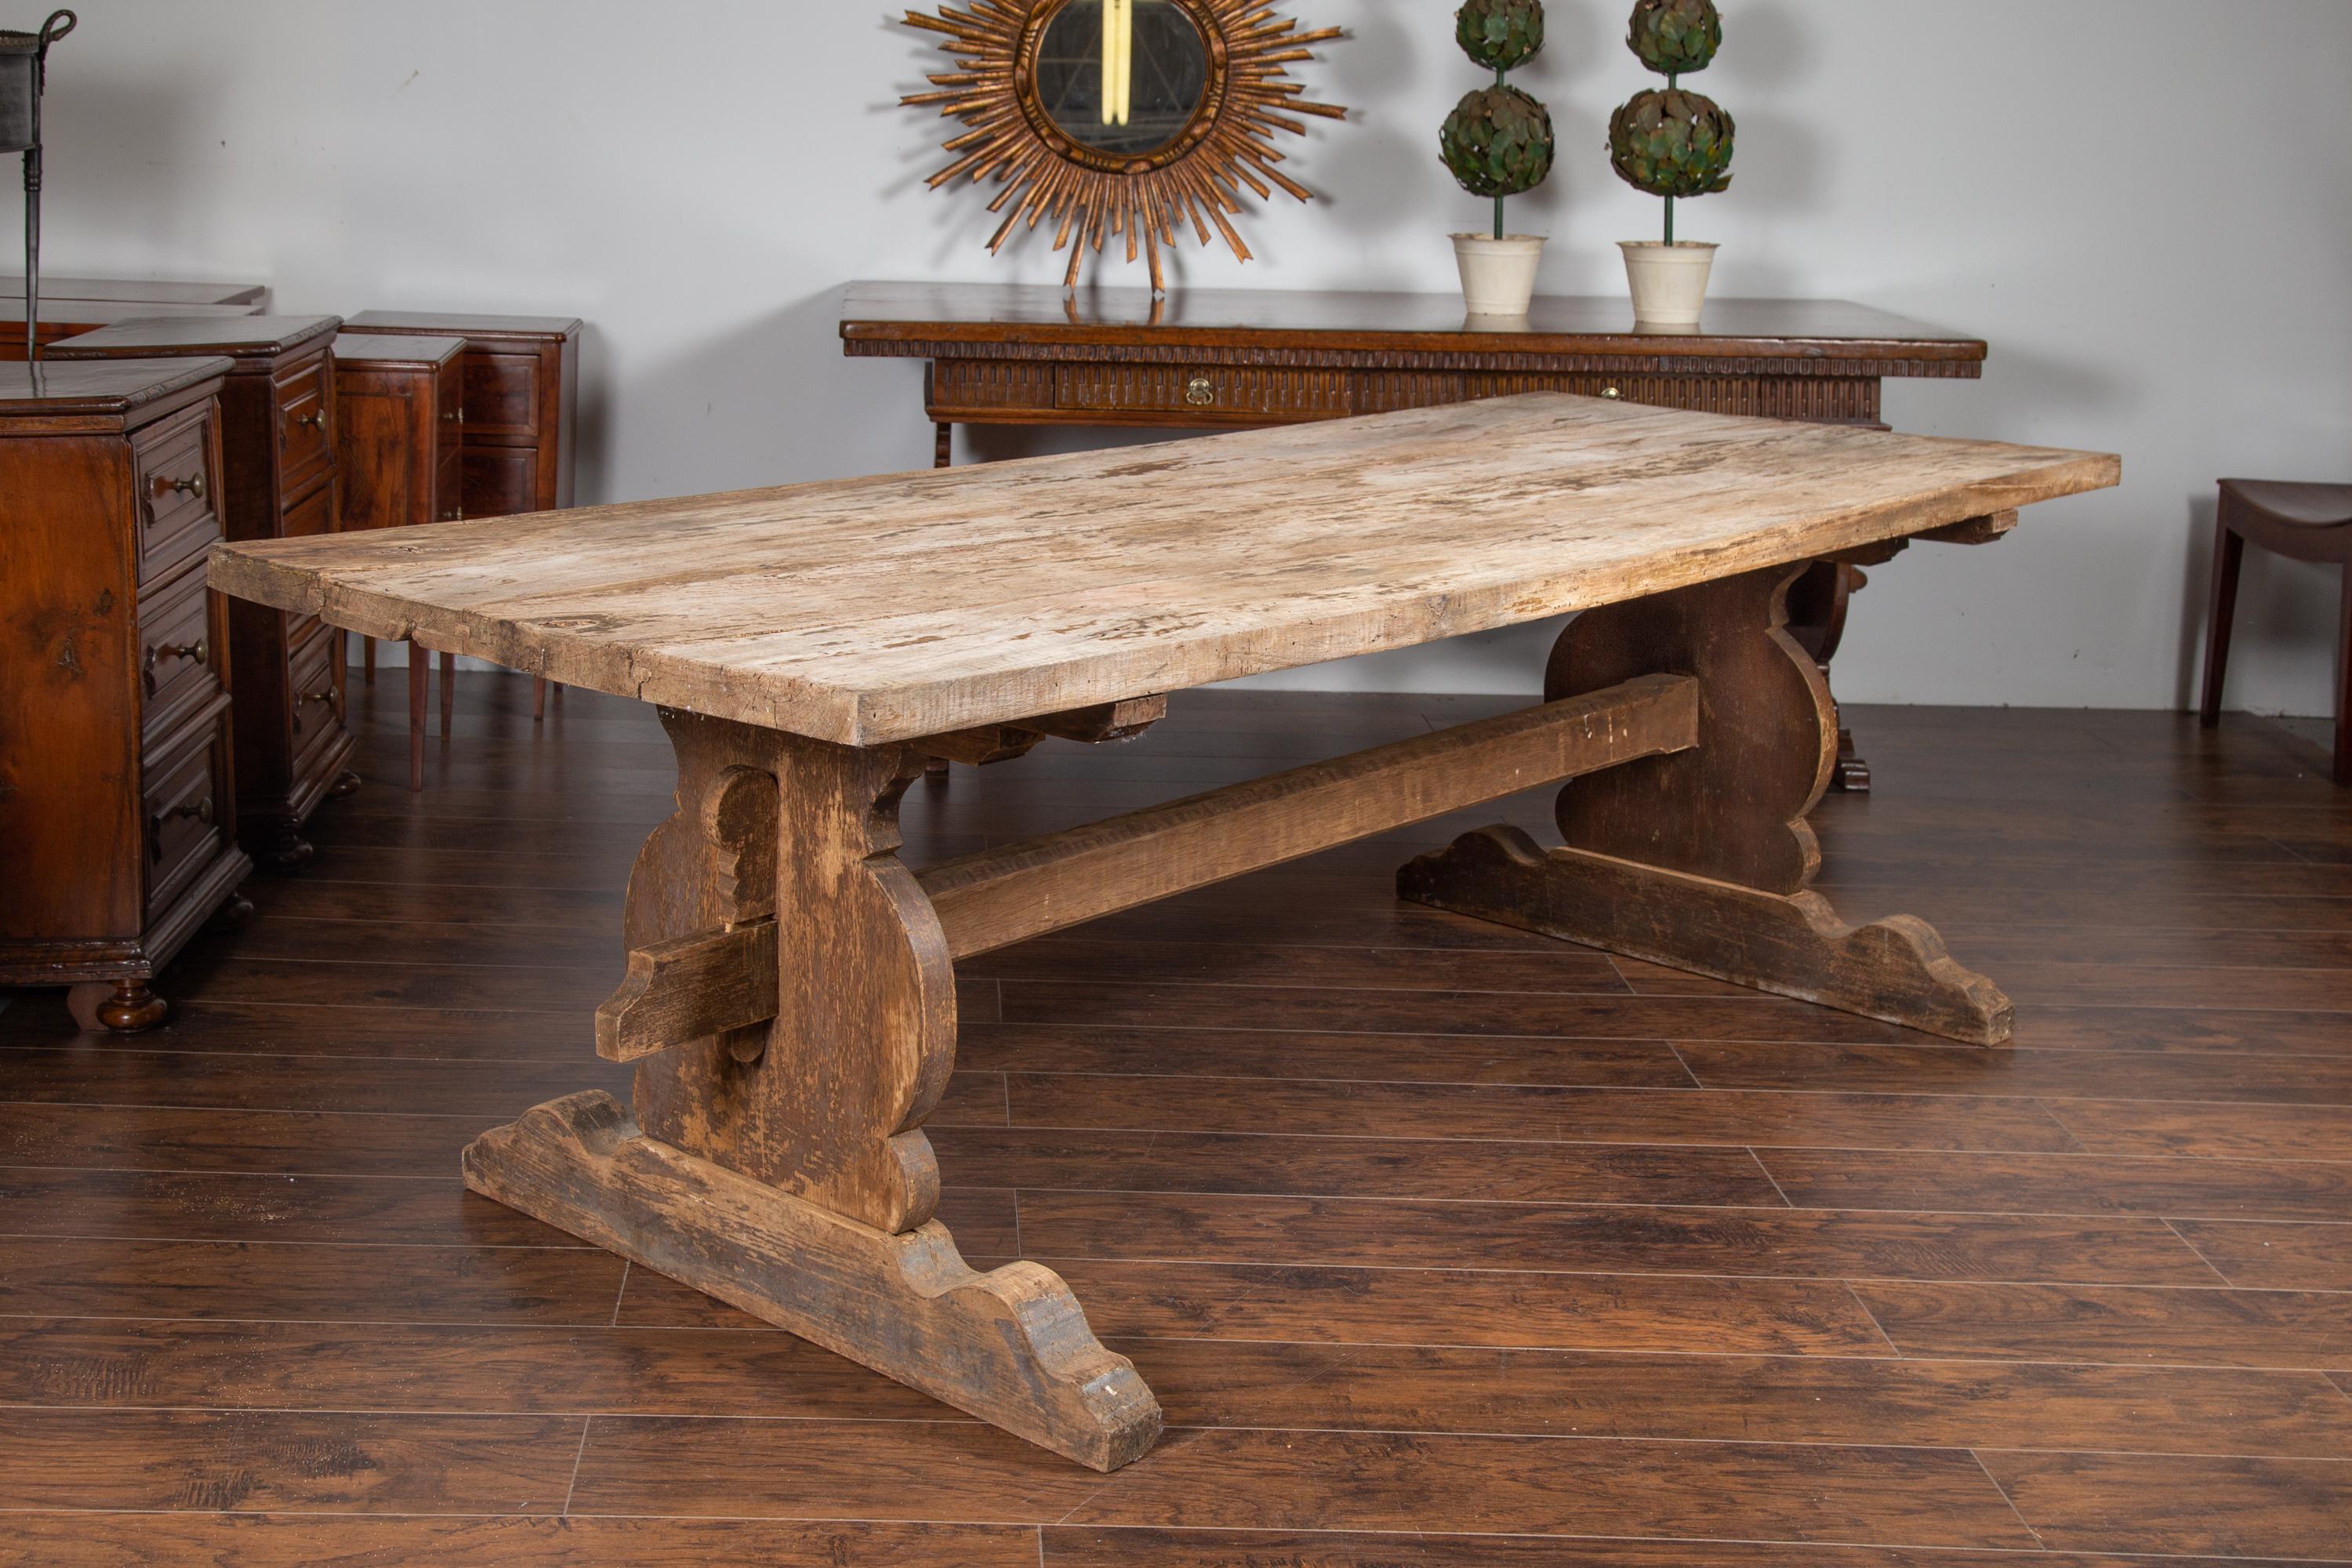 An English oak farm table from the late 19th century, with carved trestle base and weathered appearance. Born in England during the last quarter of the 19th century, this exquisite farm table features a rectangular removable planked top presenting a